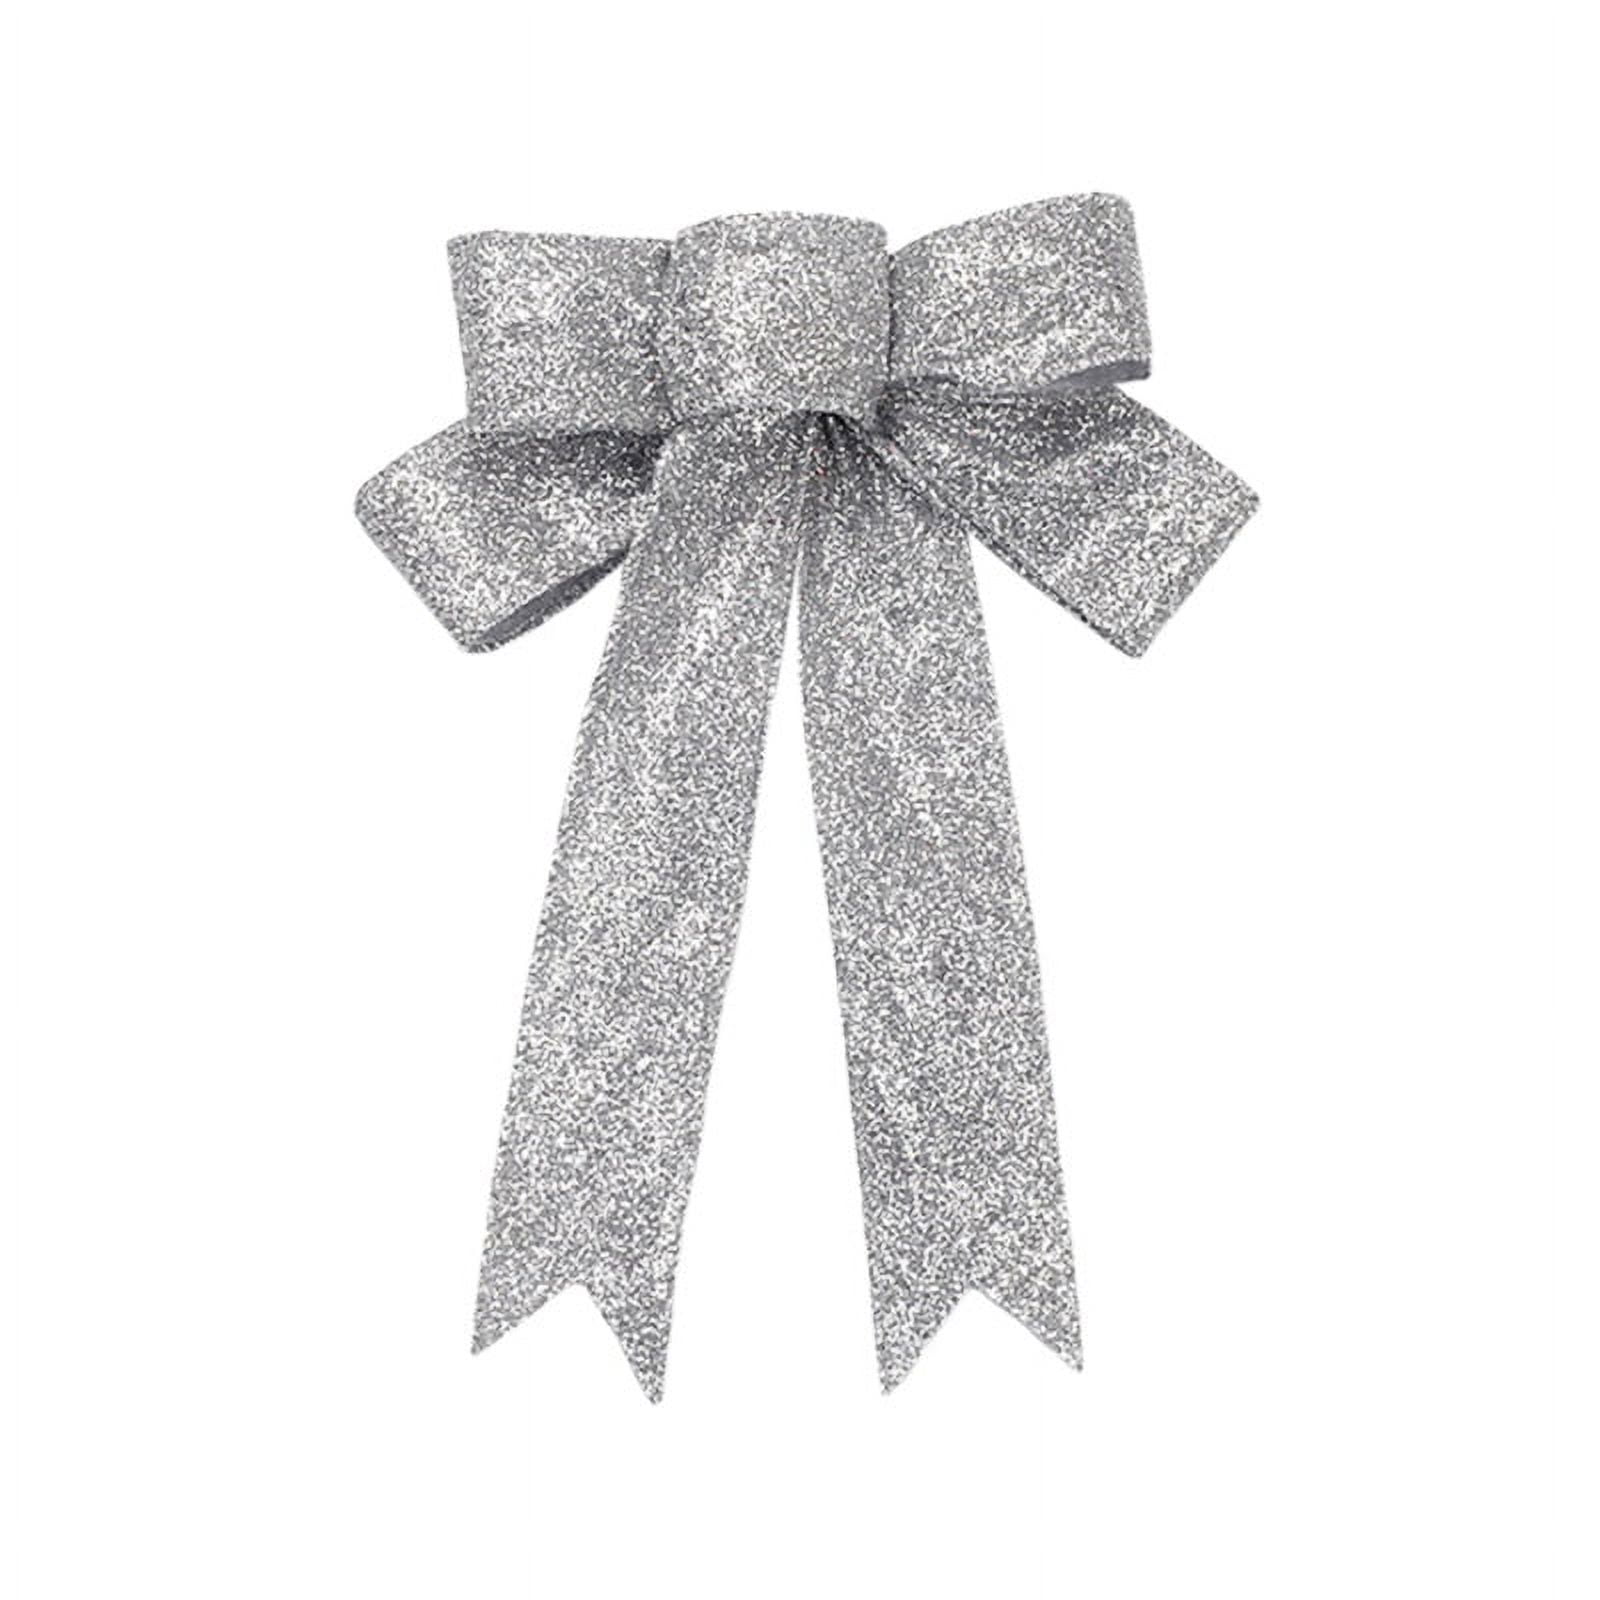 3 x Satin Ribbon Bows,White Bow, Silver Bow, Party Bow, Gift Wrapping Bow,  Christmas Bow, Decorative Bow, Self Adhesive Bow